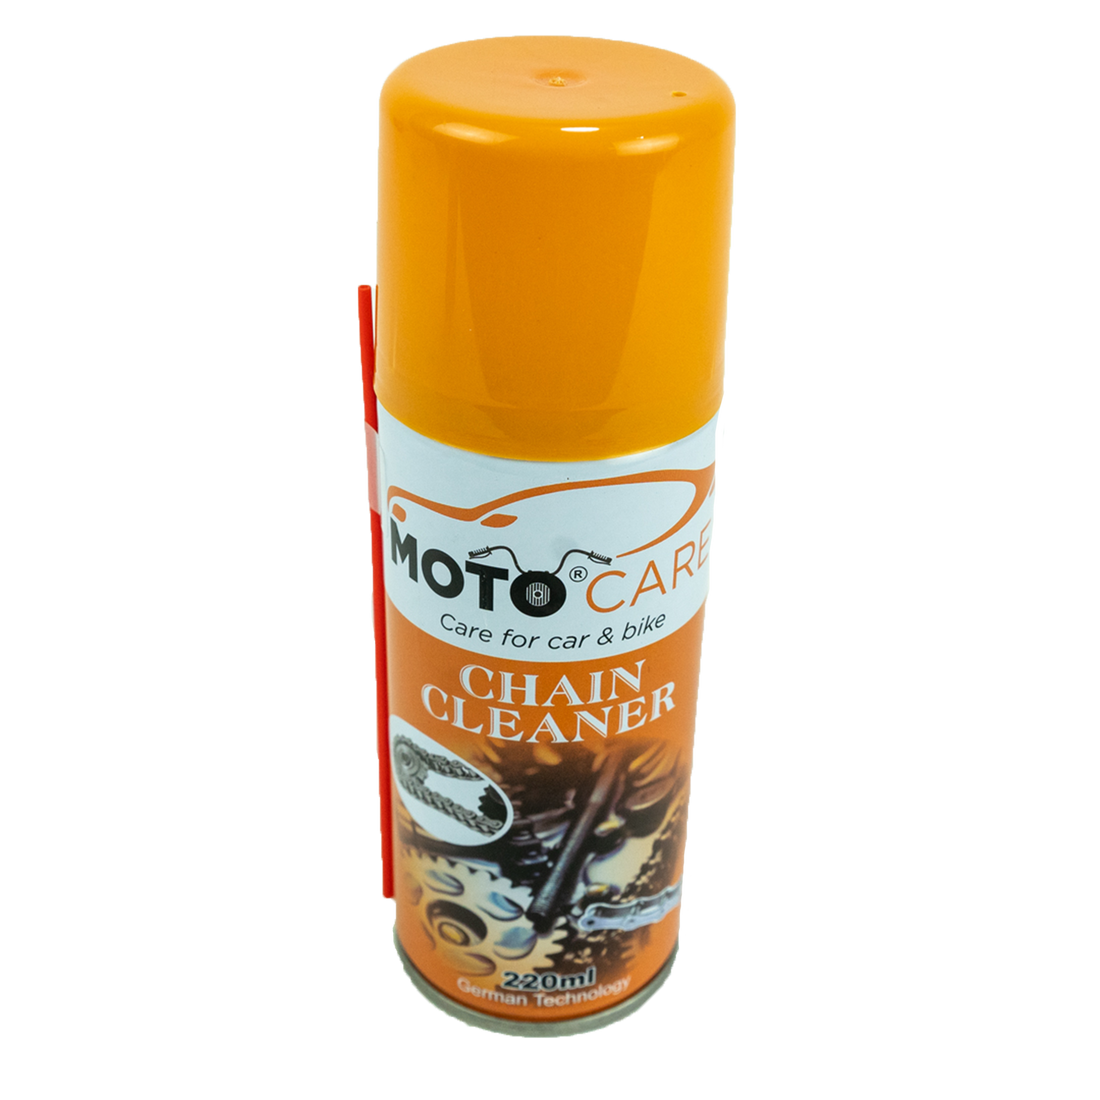 Moto Care Chain Cleaner